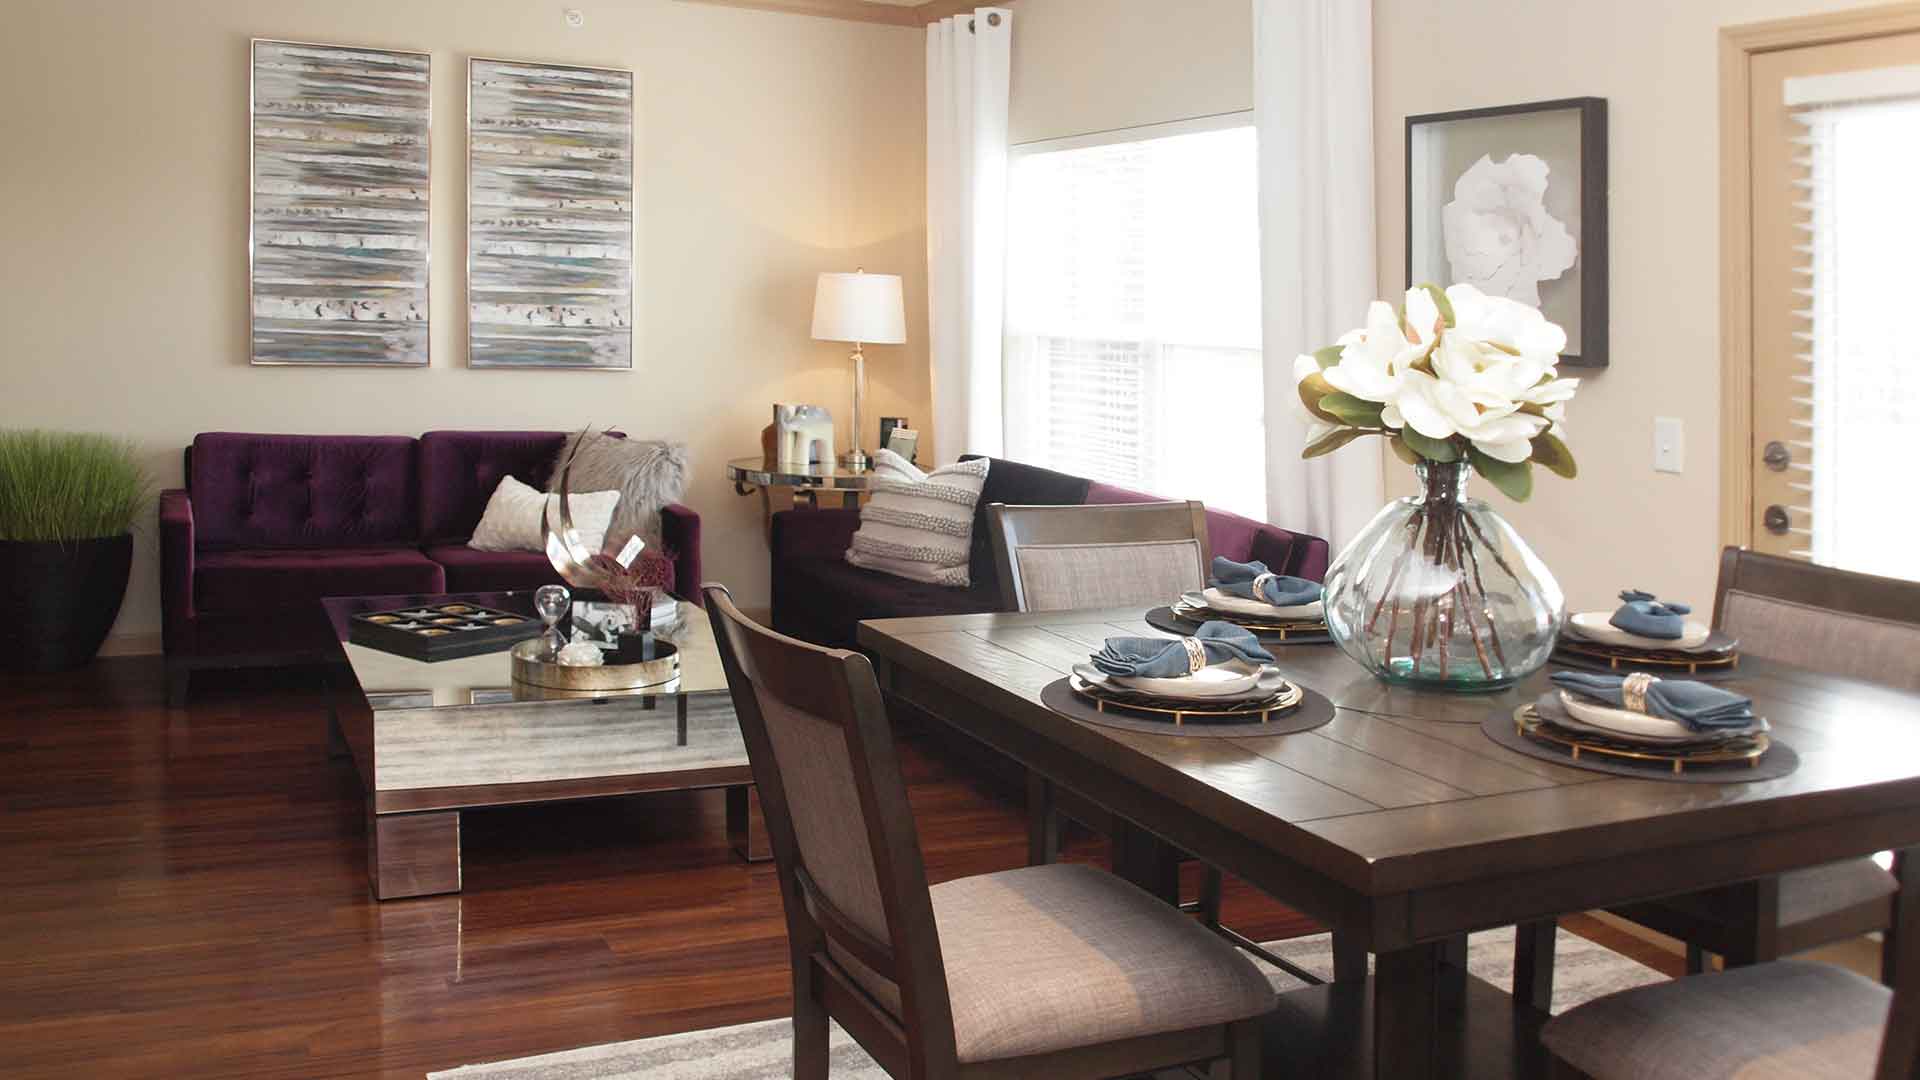 Fully decorated living and dining room space at Palmera.